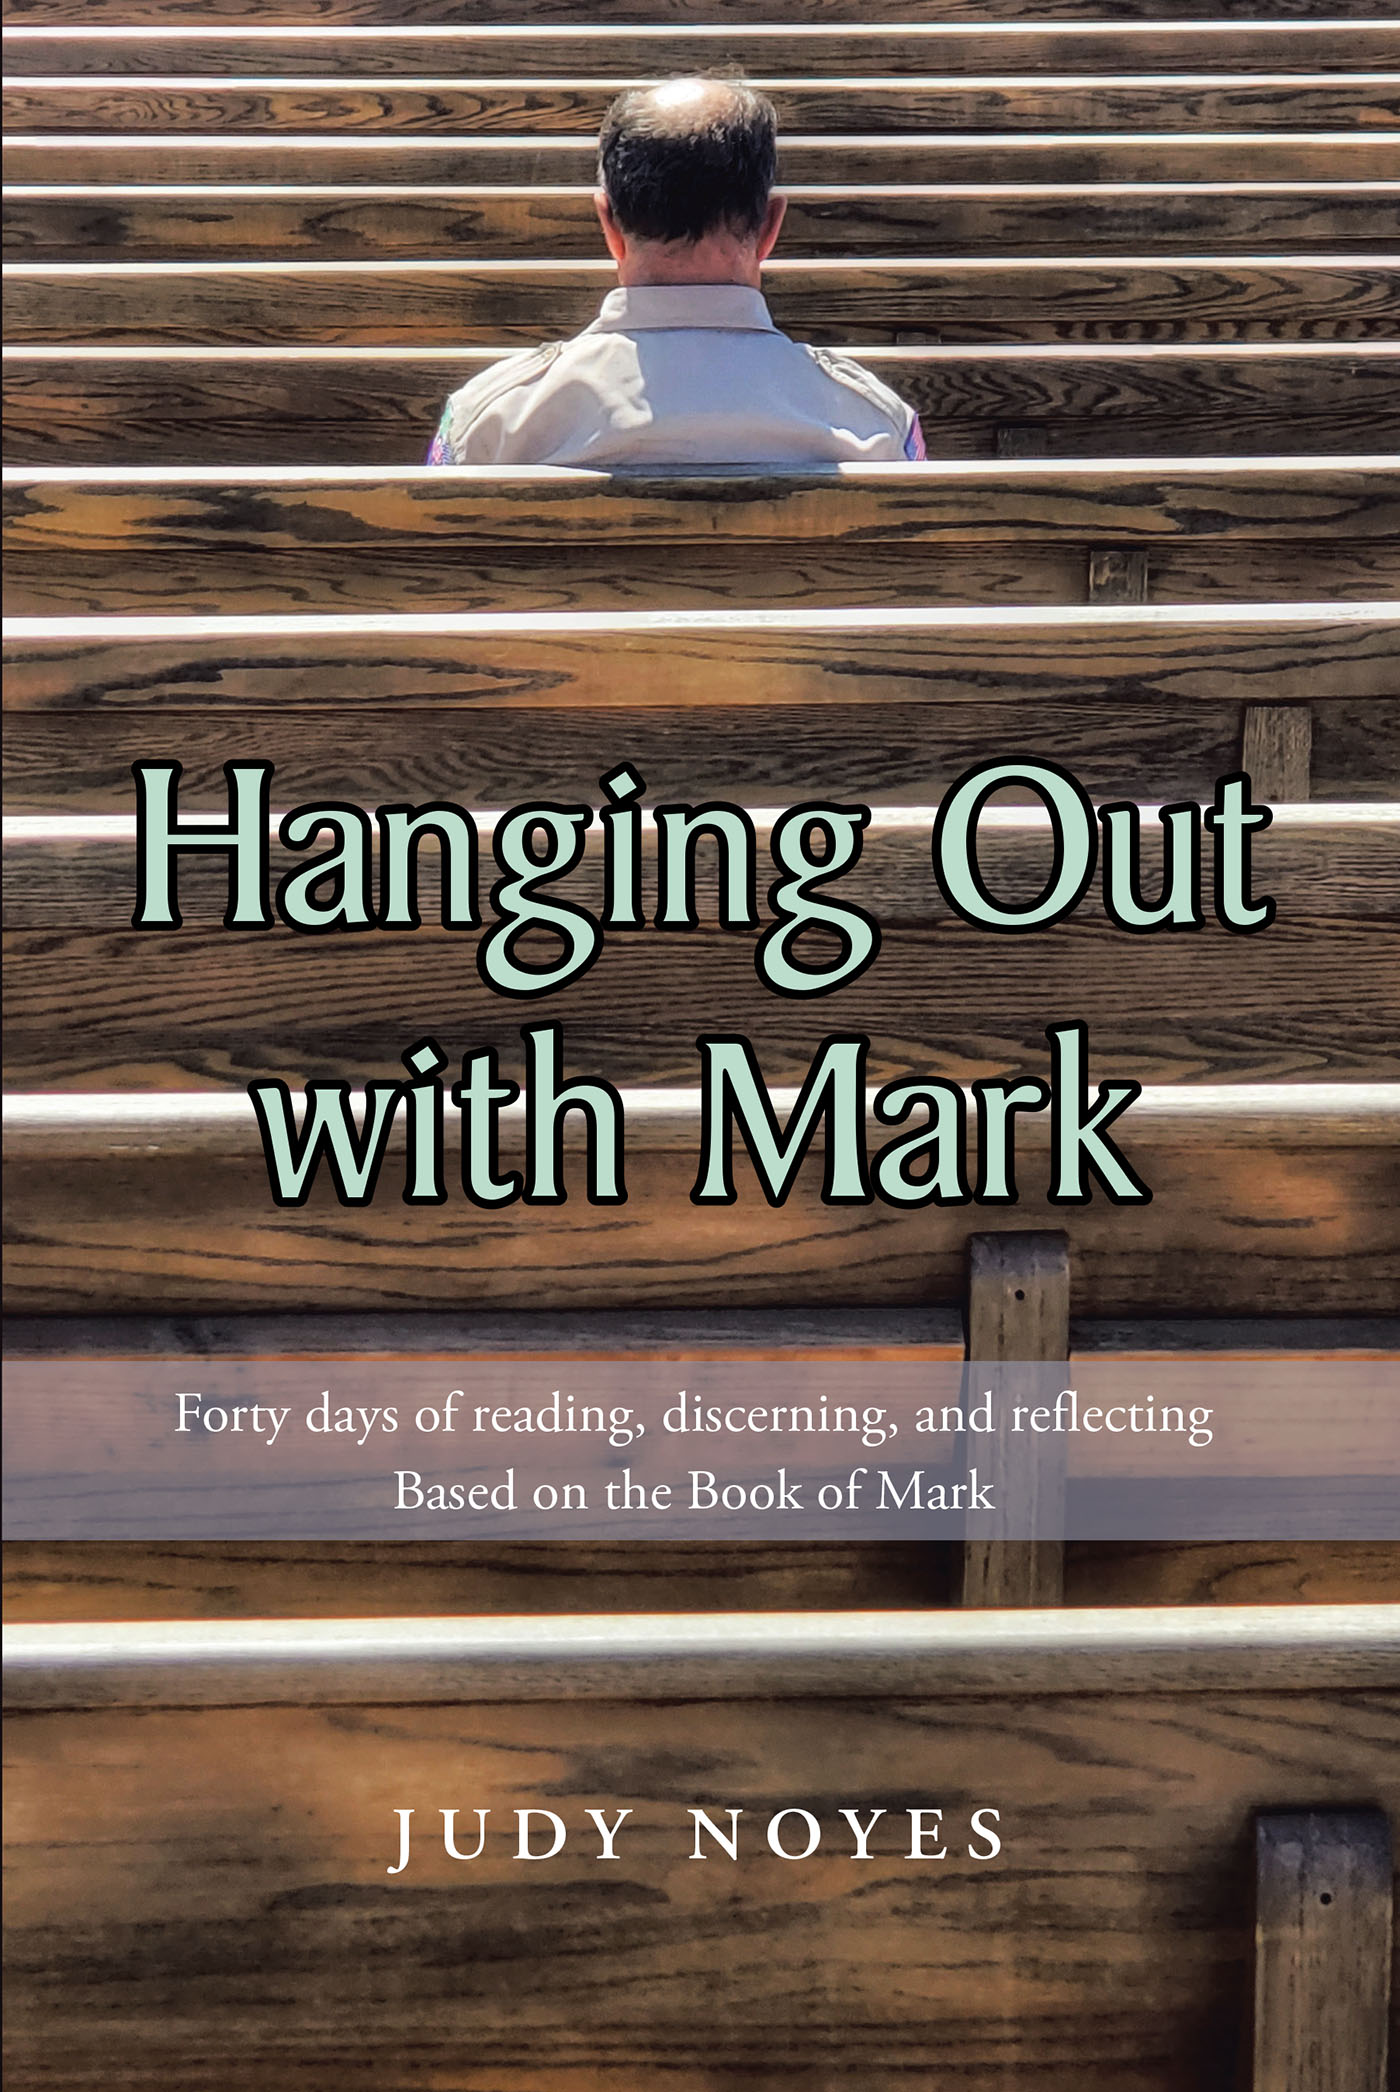 Judy Noyes’s Newly Released "Hanging Out with Mark" is a Fascinating Devotional That Expands Upon the Lessons Within the Book of Mark